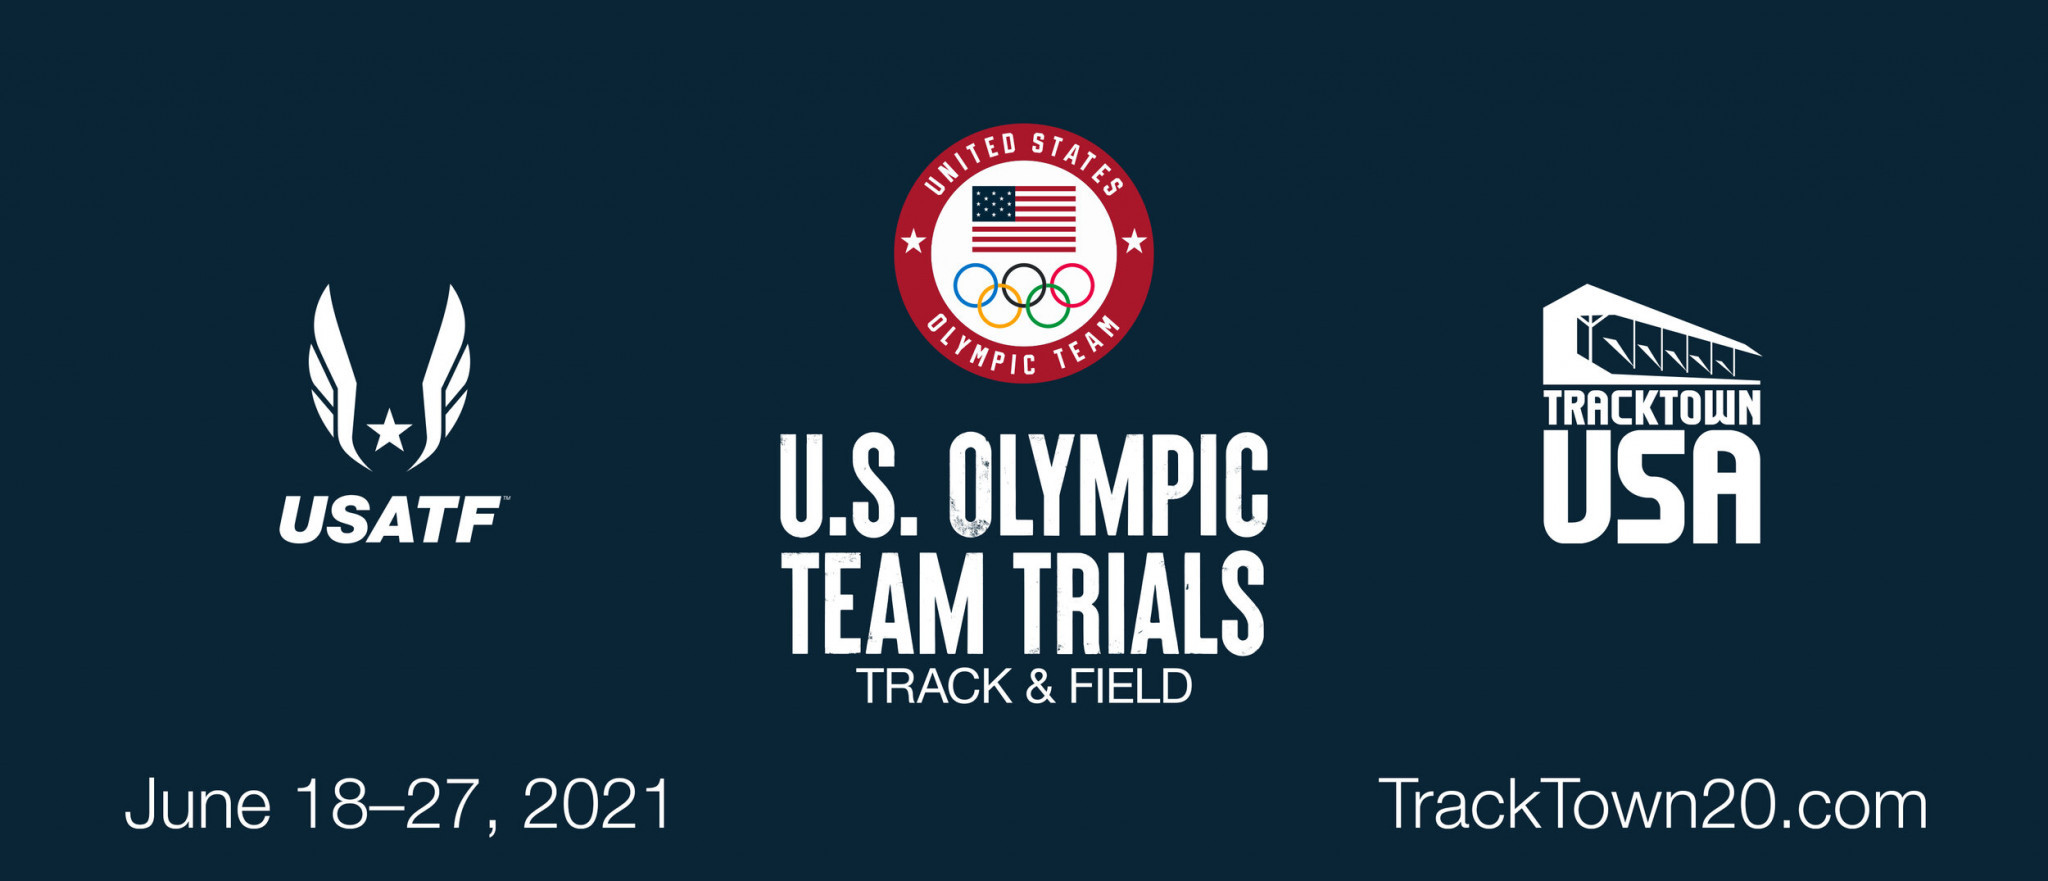 TrackTown USA has refunded spectators who have bought tickets for the US Olympic Trials because of a reduction in the capacity at Hayward Field due to COVID-19 ©TrackTown USA